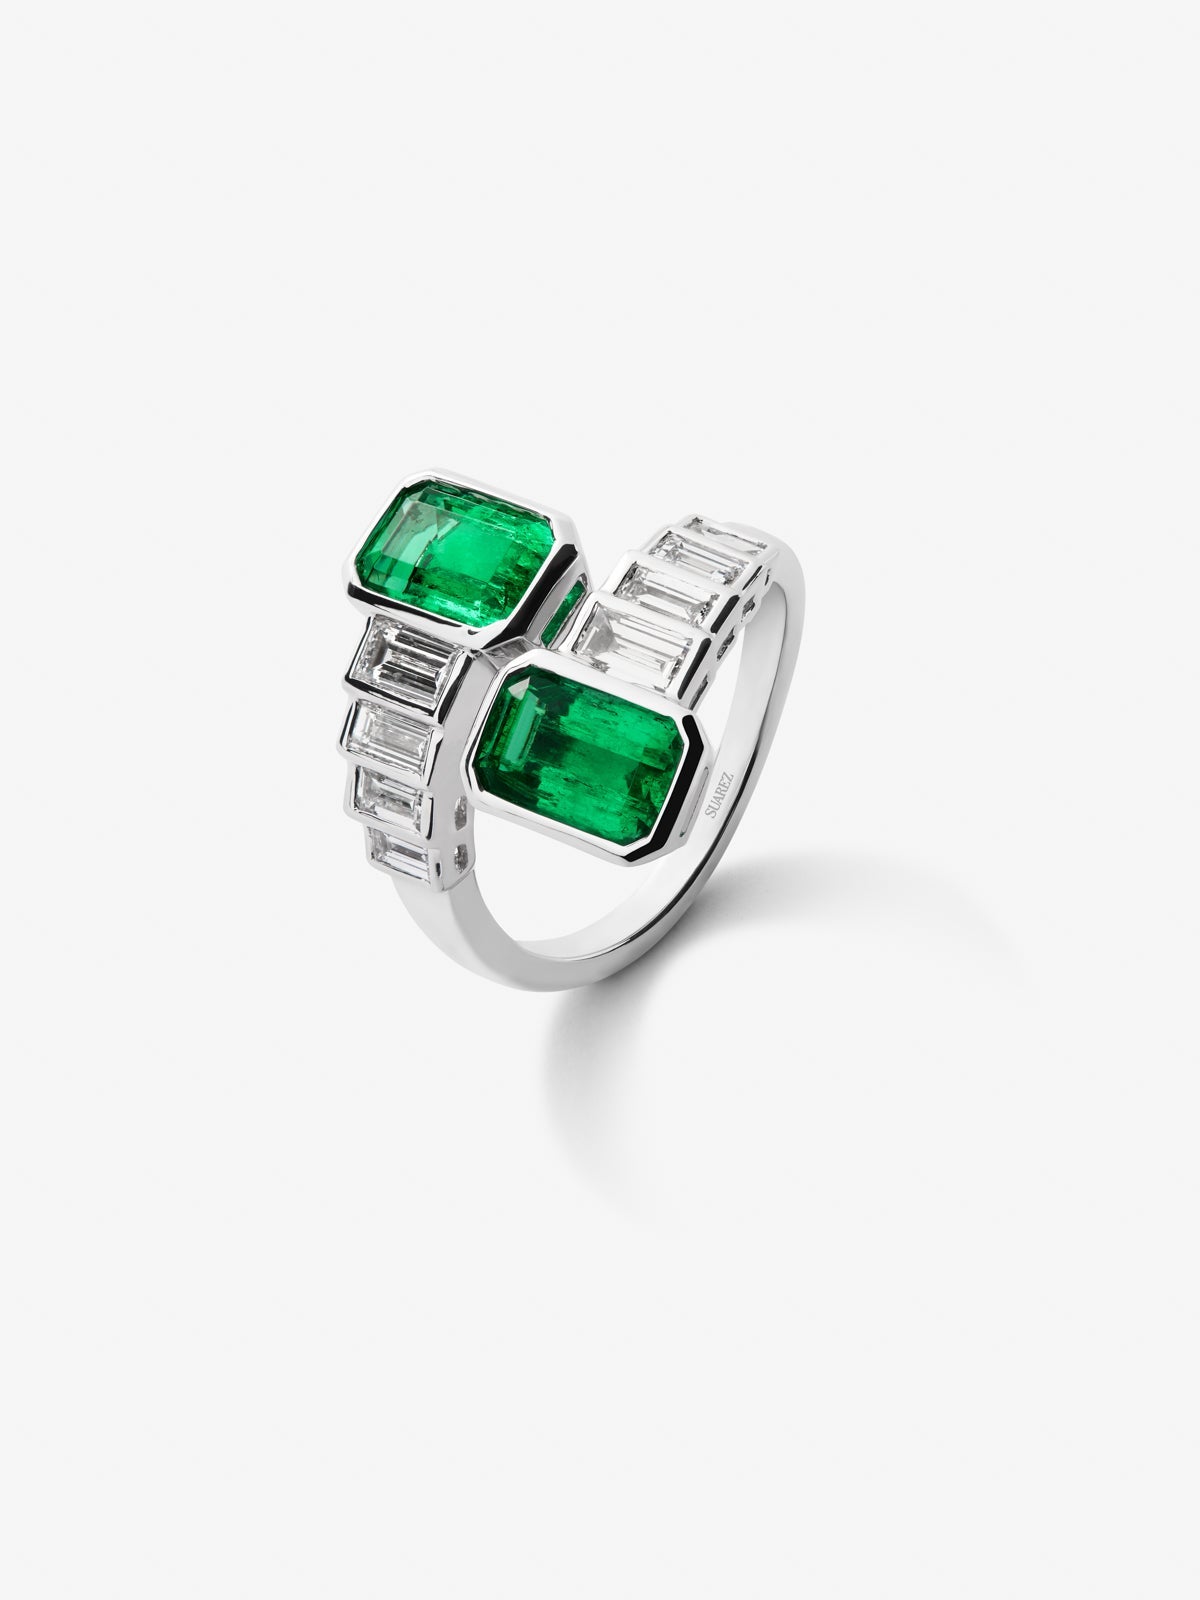 You and me ring in 18K white gold with 2 octagonal-cut green emeralds with a total of 2.71 cts and 8 baguette-cut diamonds with a total of 1.08 cts